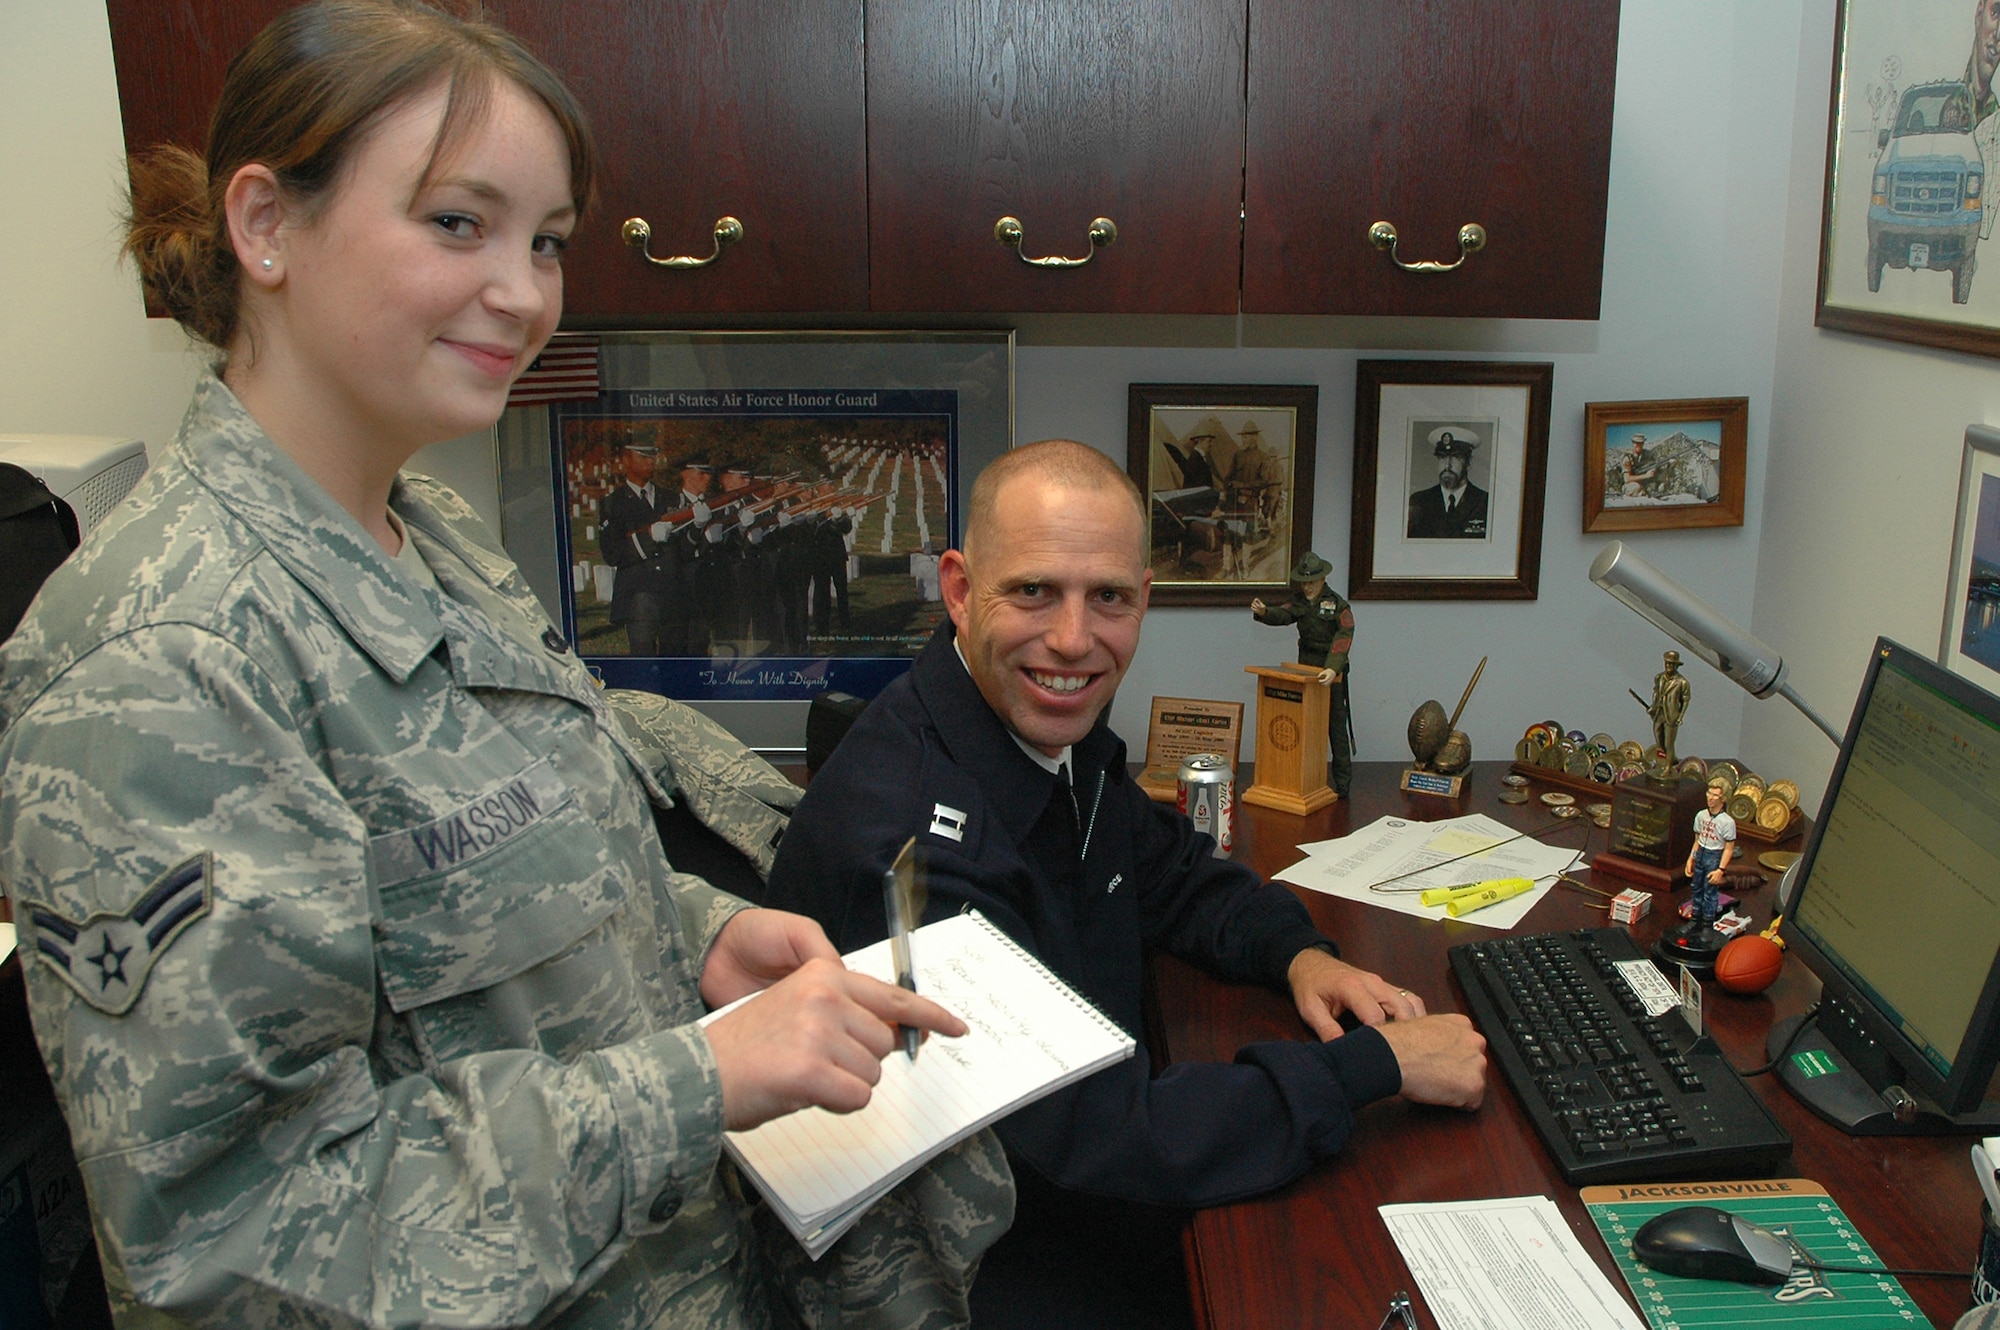 Airman 1st Class Anna M. Wasson, 11th Operations Group, speaks with Capt. Michael D. Fanton, U.S. Air Force Honor Guard, about creating e-mail accounts for incoming Airmen Sept. 16 at the Honor Guard complex. Airman Wasson was coined Sept. 15 during a wing stand-up by Col. Jon A. Roop, 11th Wing commander, for spearheading the validation of 450 network accounts and being named the 11th Wing Information Manager of the Quarter. (U.S. Air Force photo by Senior Airman Tim Chacon)